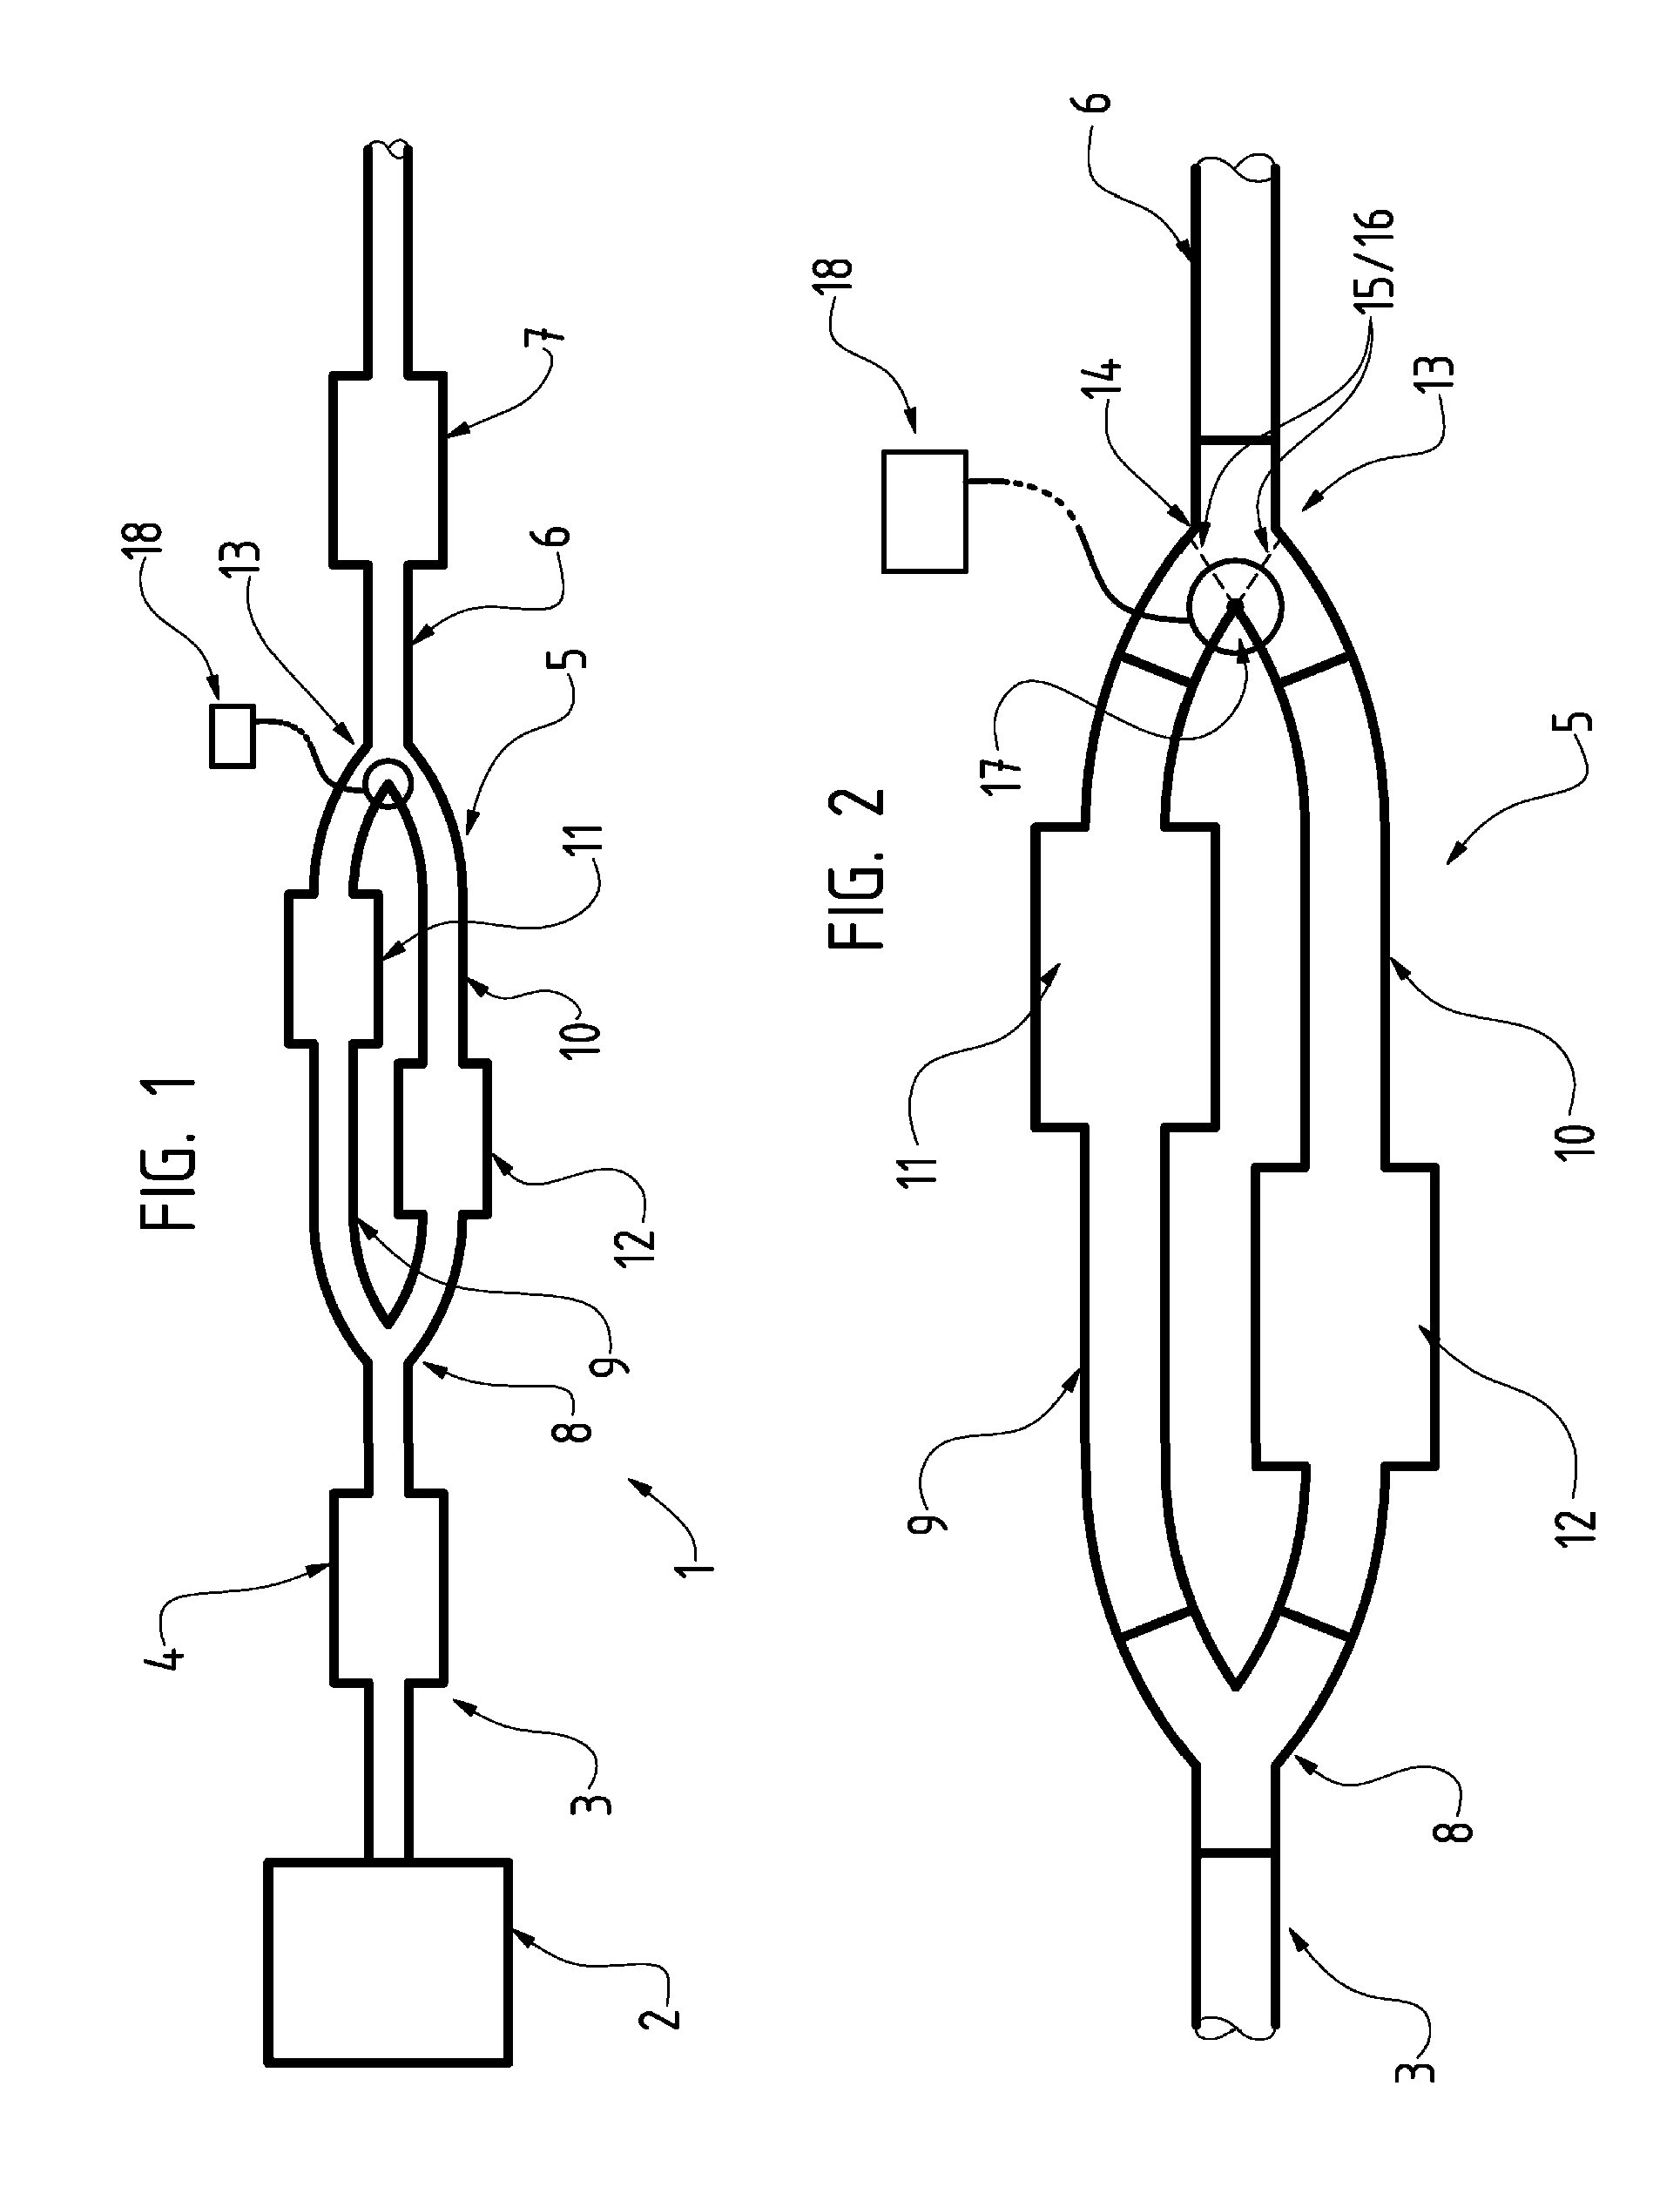 Exhaust component of gas exhaust line